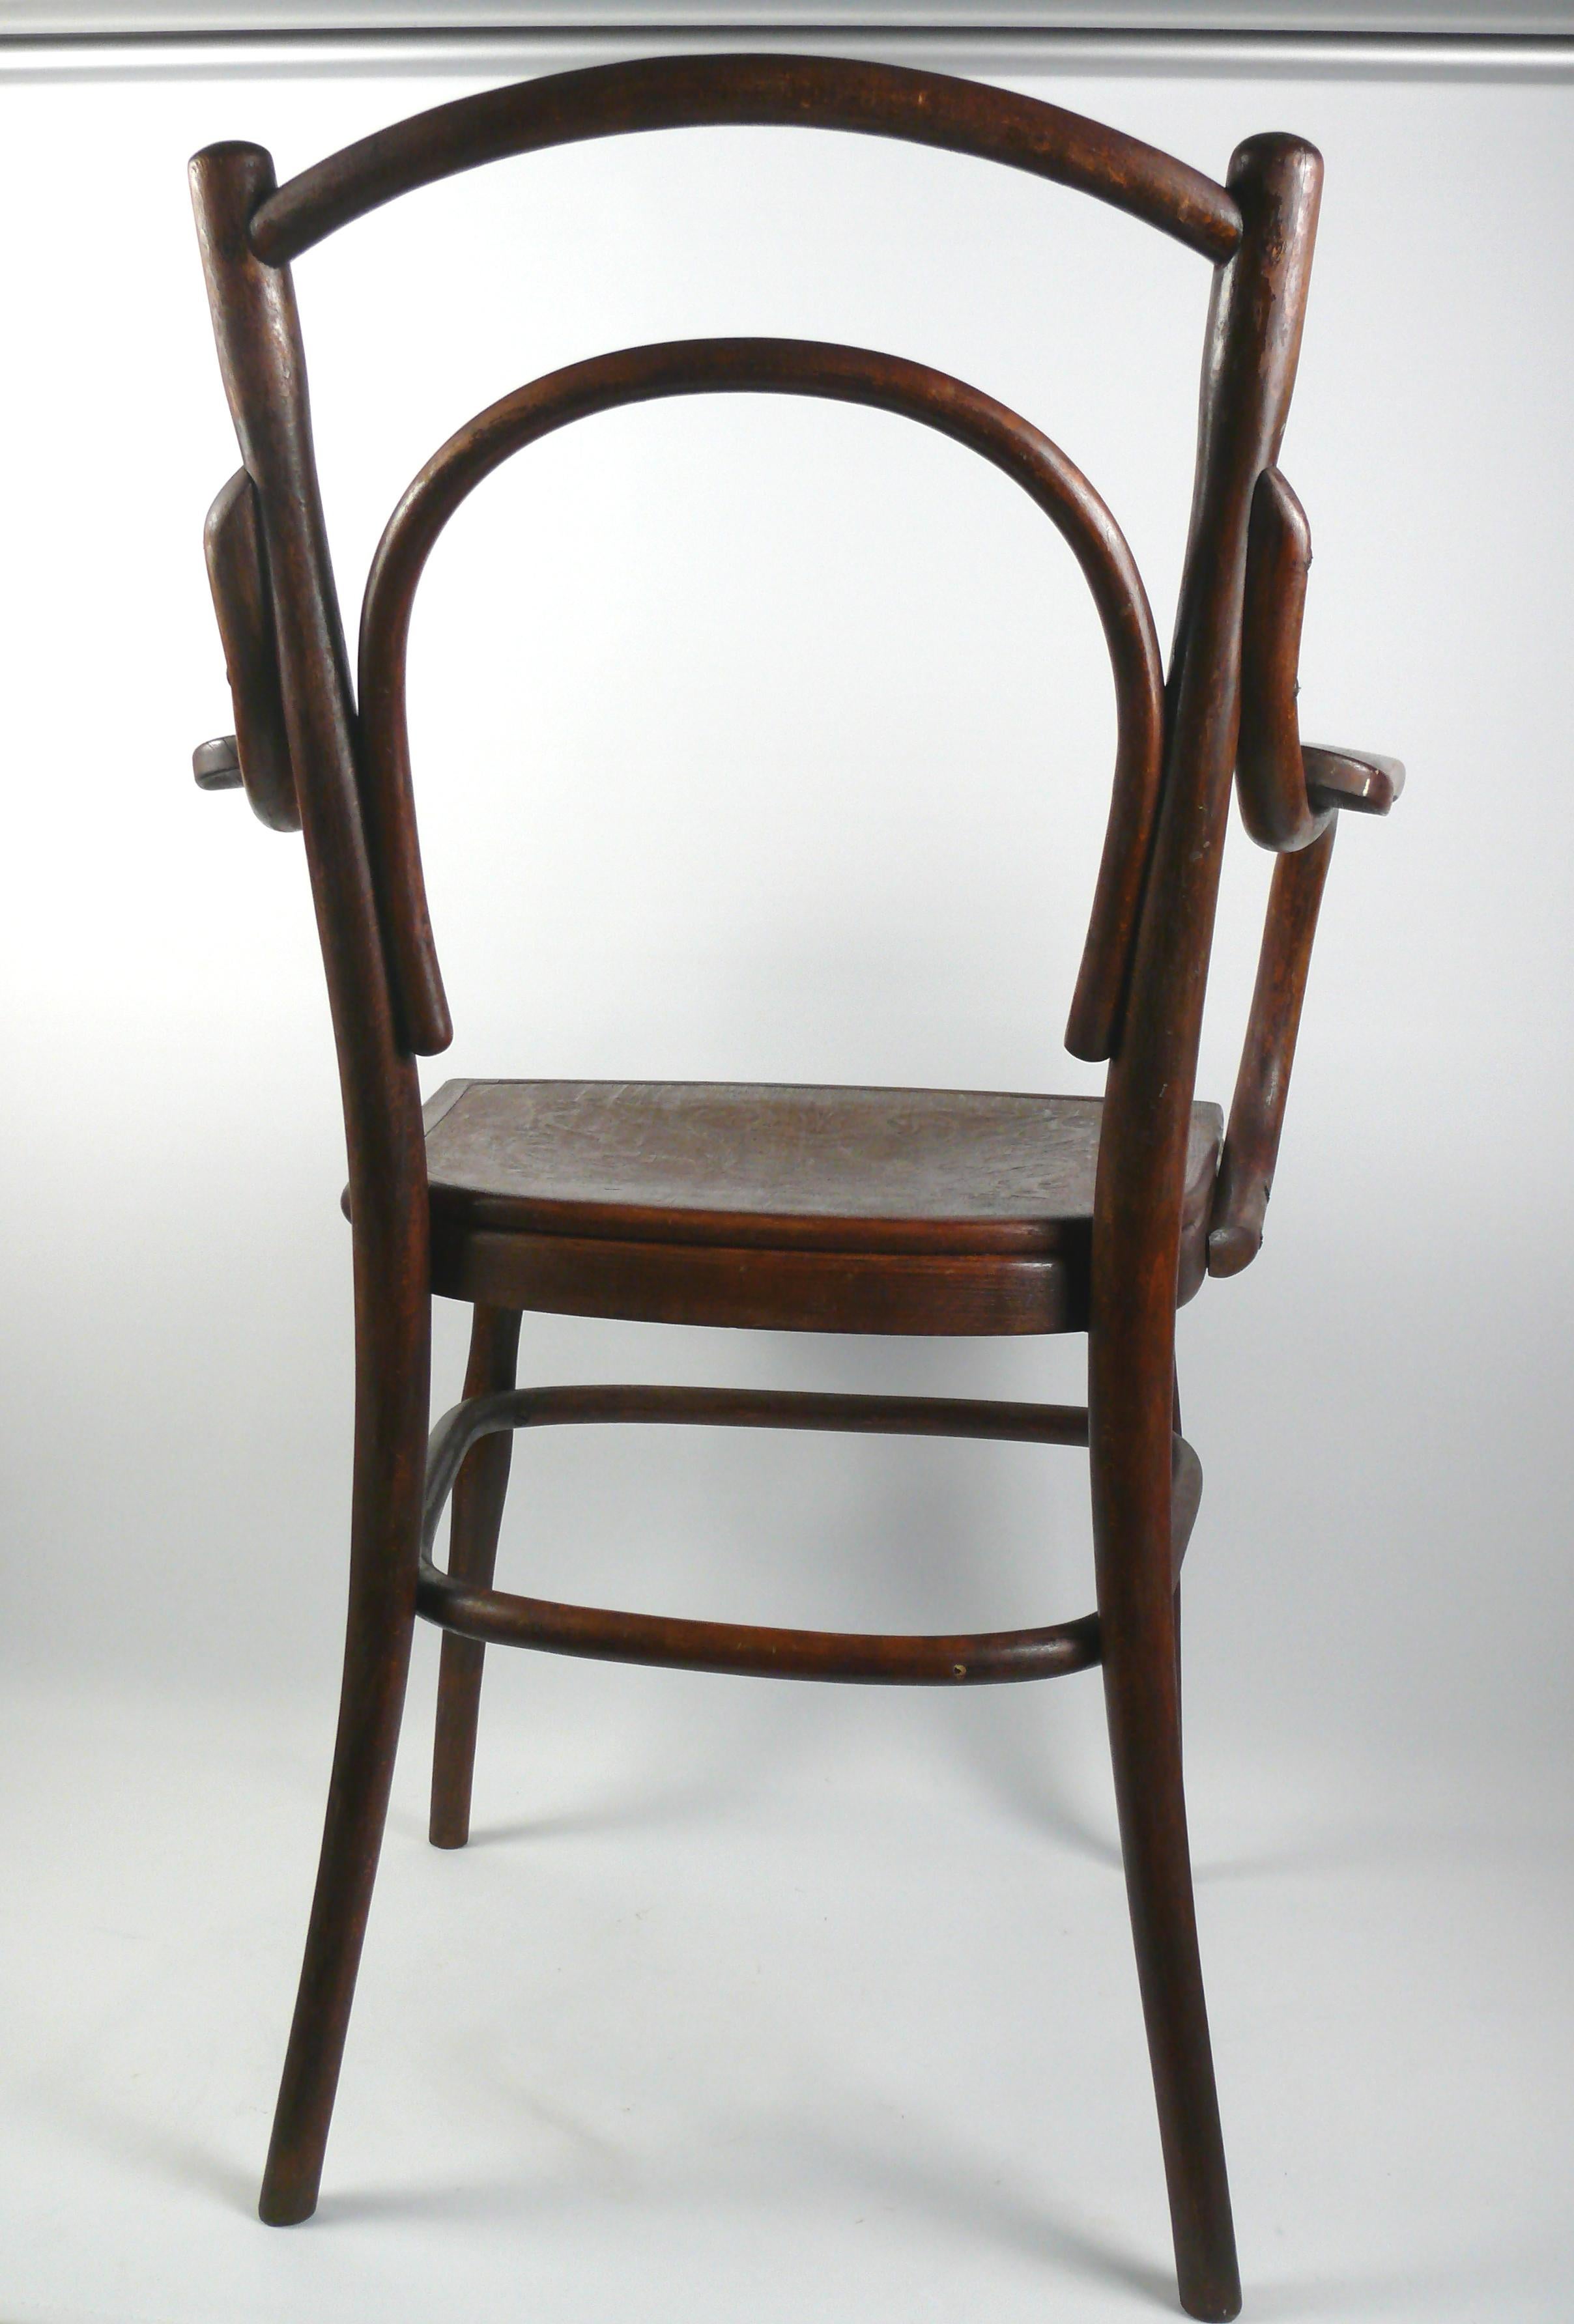 Art Nouveau Thonet Bentwood Fauteuil, Early 20th Century